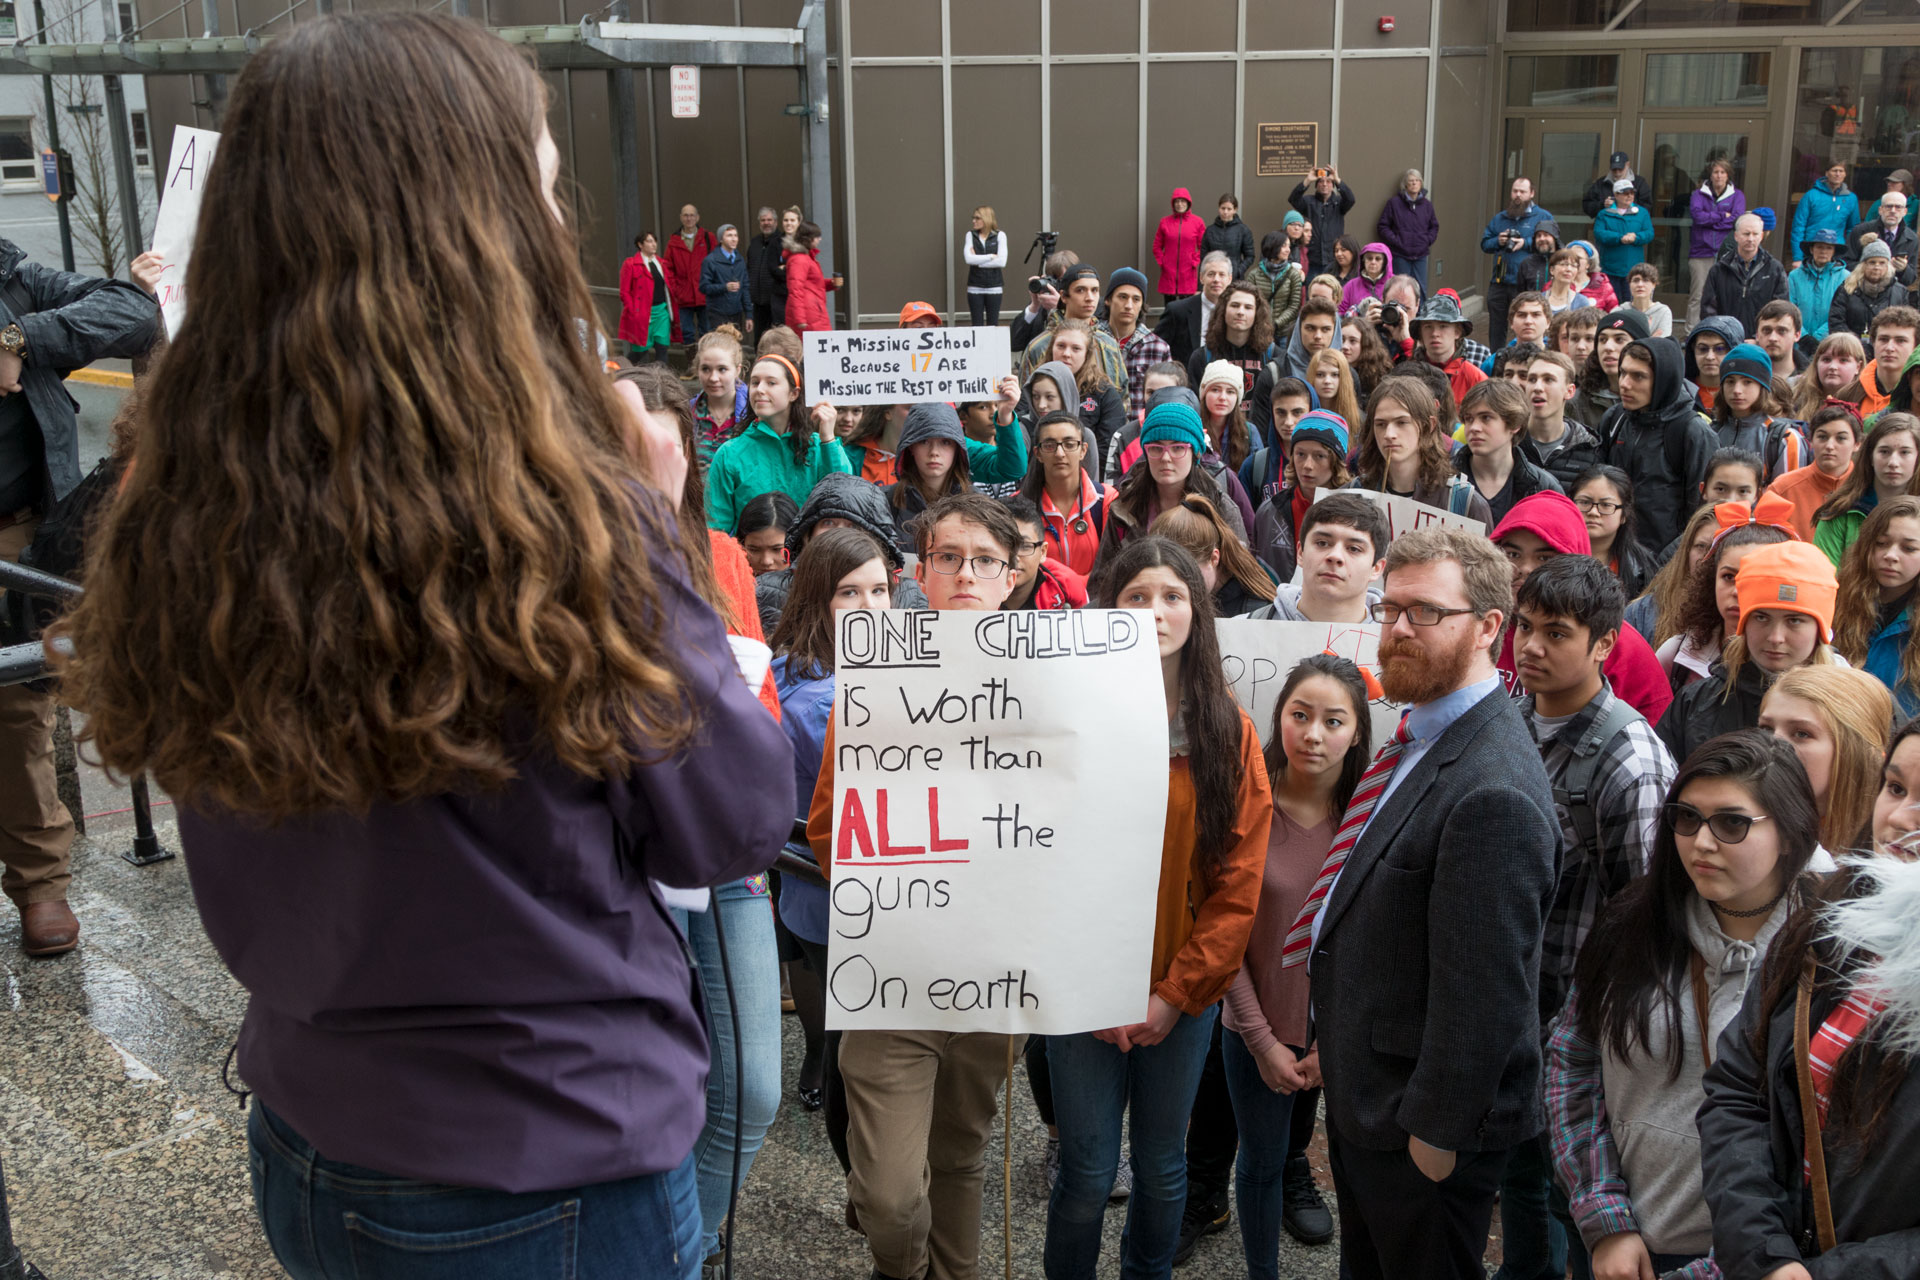 Katie McKenna speaks on the steps of the Alaska State Capitol building in Juneau at a student walkout protest on Wednesday, March 14, 2018. Students and Juneau Rep. Justin Parish, wearing the coat and tie, listen.